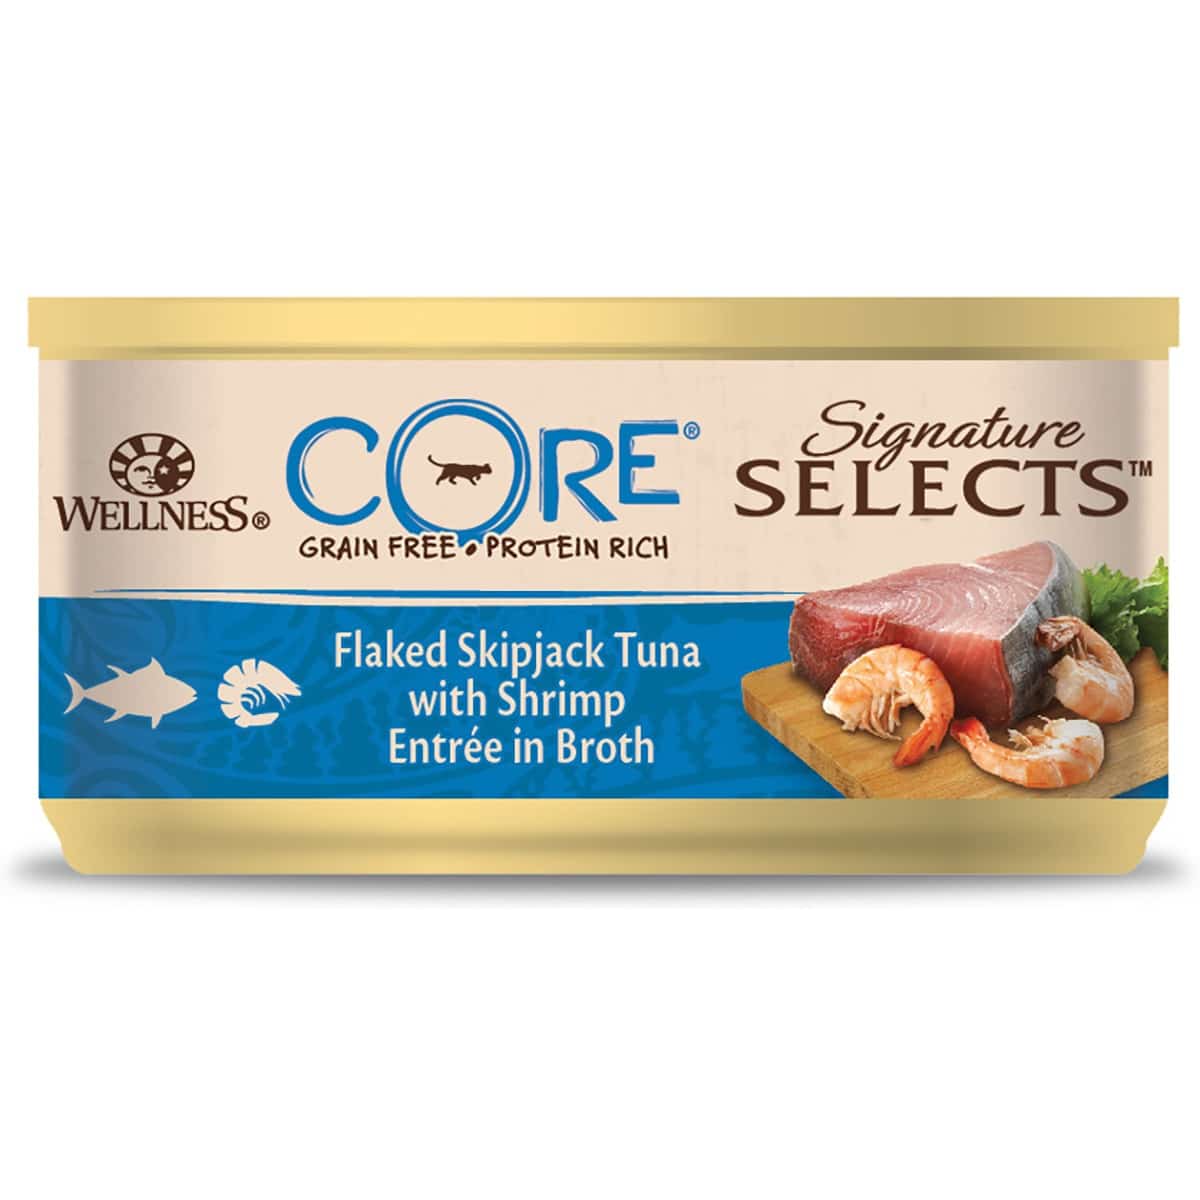 Signature SELECTS Flaked Skipjack Tuna with Shrimp in Broth